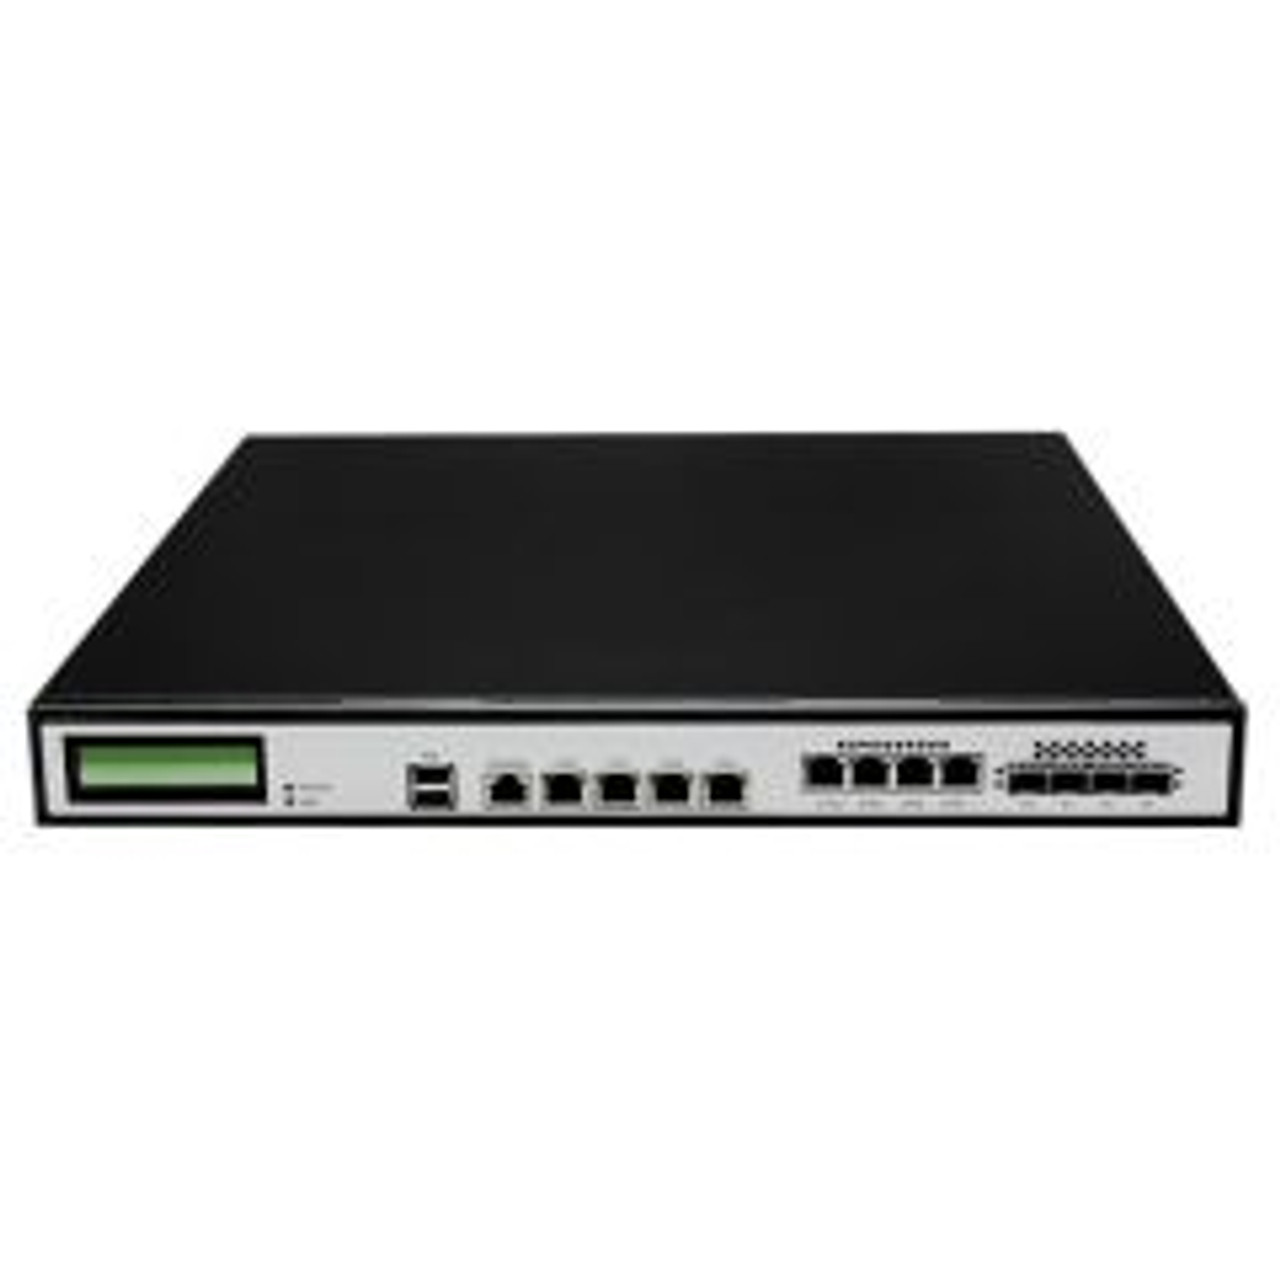 Fp7120-K9 | Cisco | Firepower 7000 Series 7120 8 X Ports Sfp (Mini-Gbic) + 4 X Ports 1000Base-T 1U Rack-Mountable Network Security Firewall Appliance For Chassis